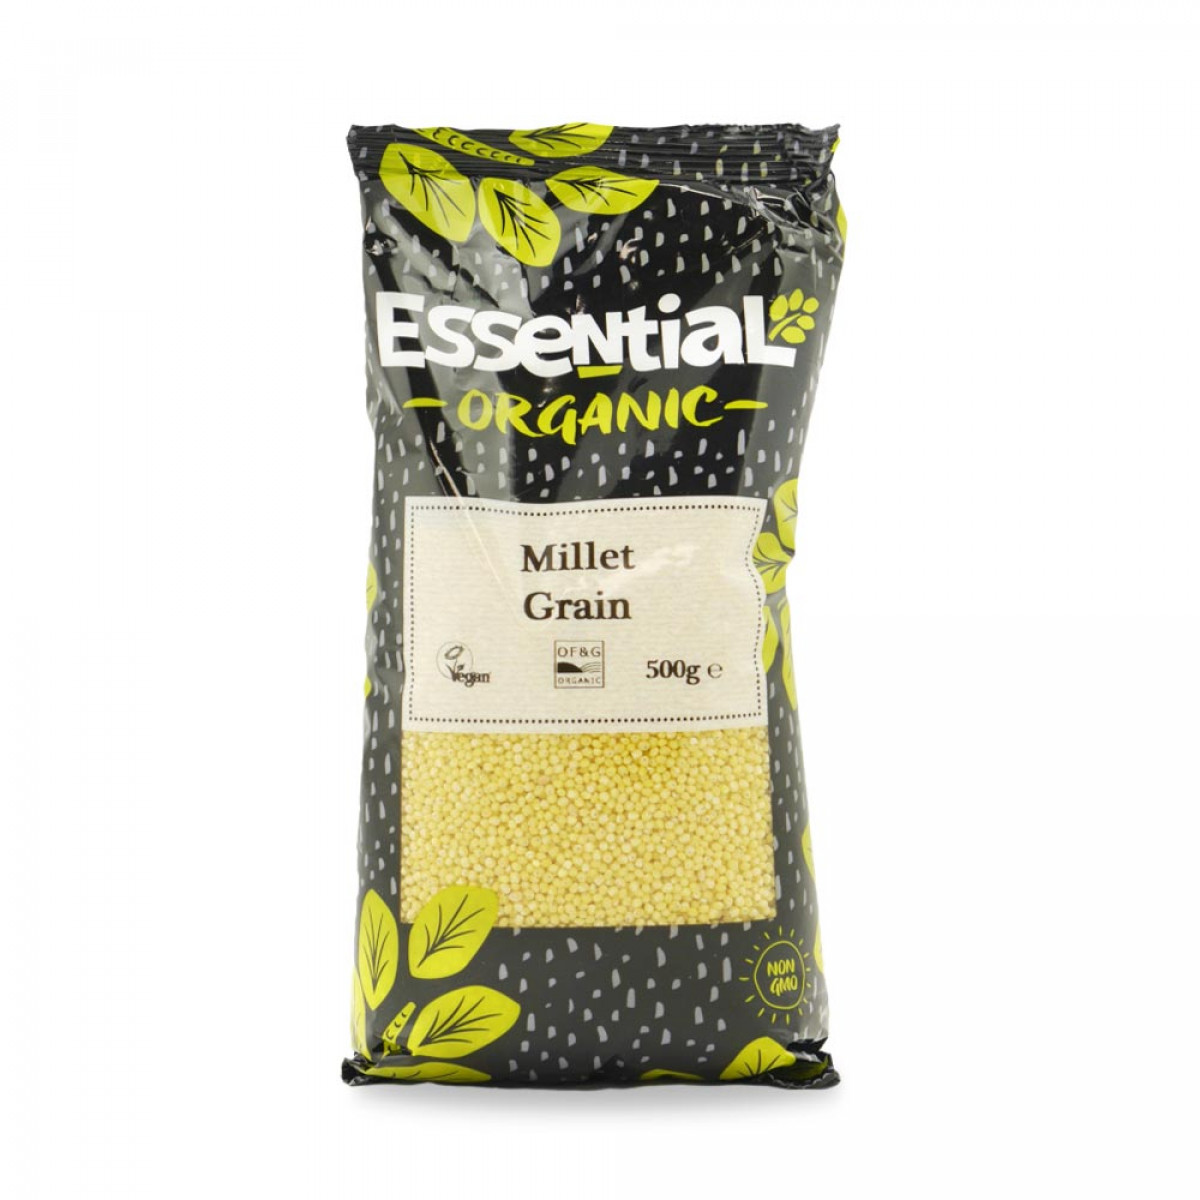 Product picture for Millet